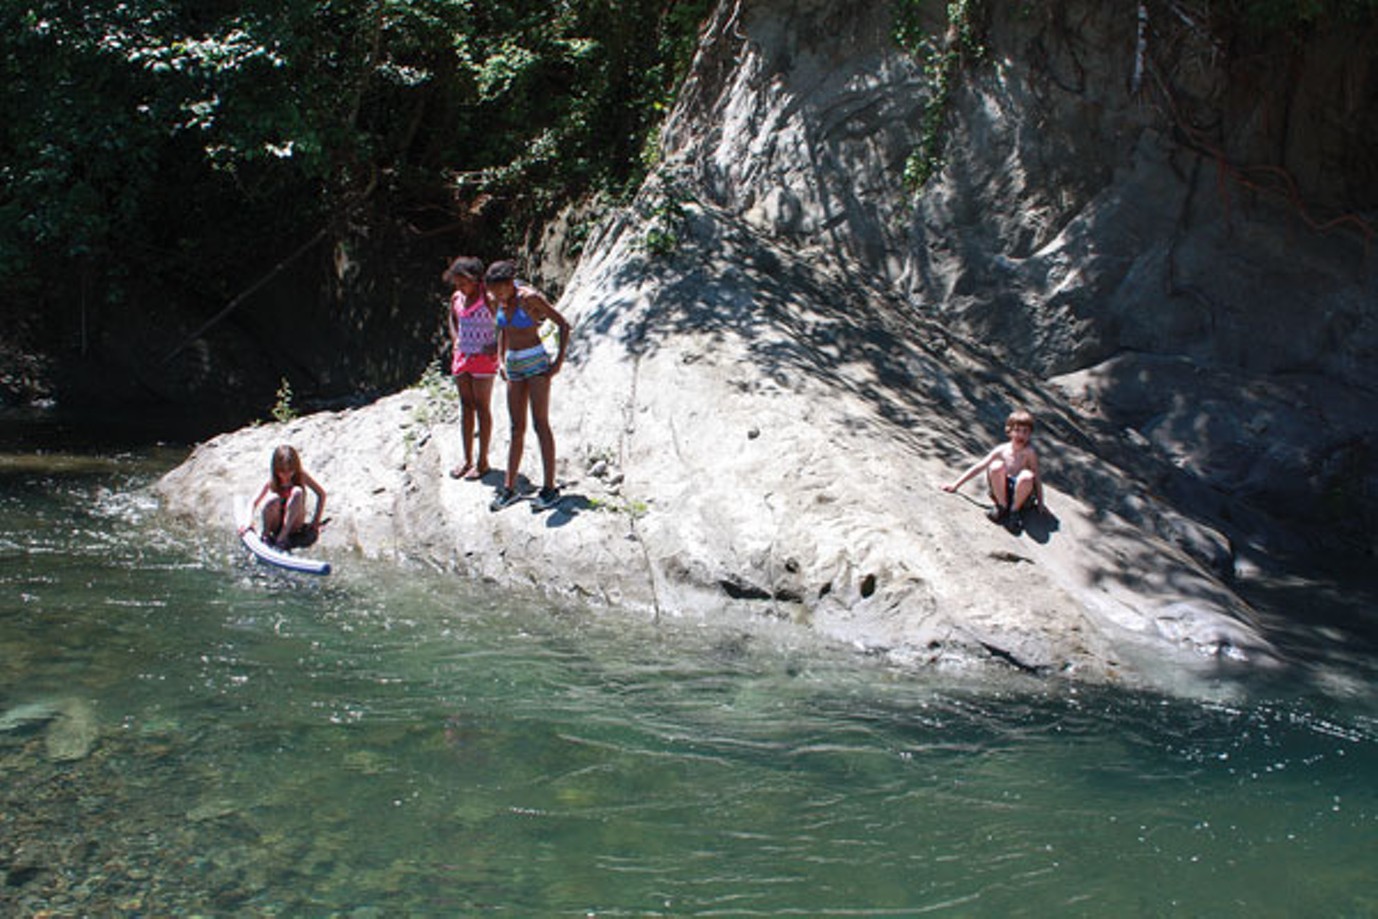 Swimmer’s Delight, voted Best Swimming Hole in 2013 by North Coast Journal readers. - PHOTO BY CHRISTIAN PENNINGTON